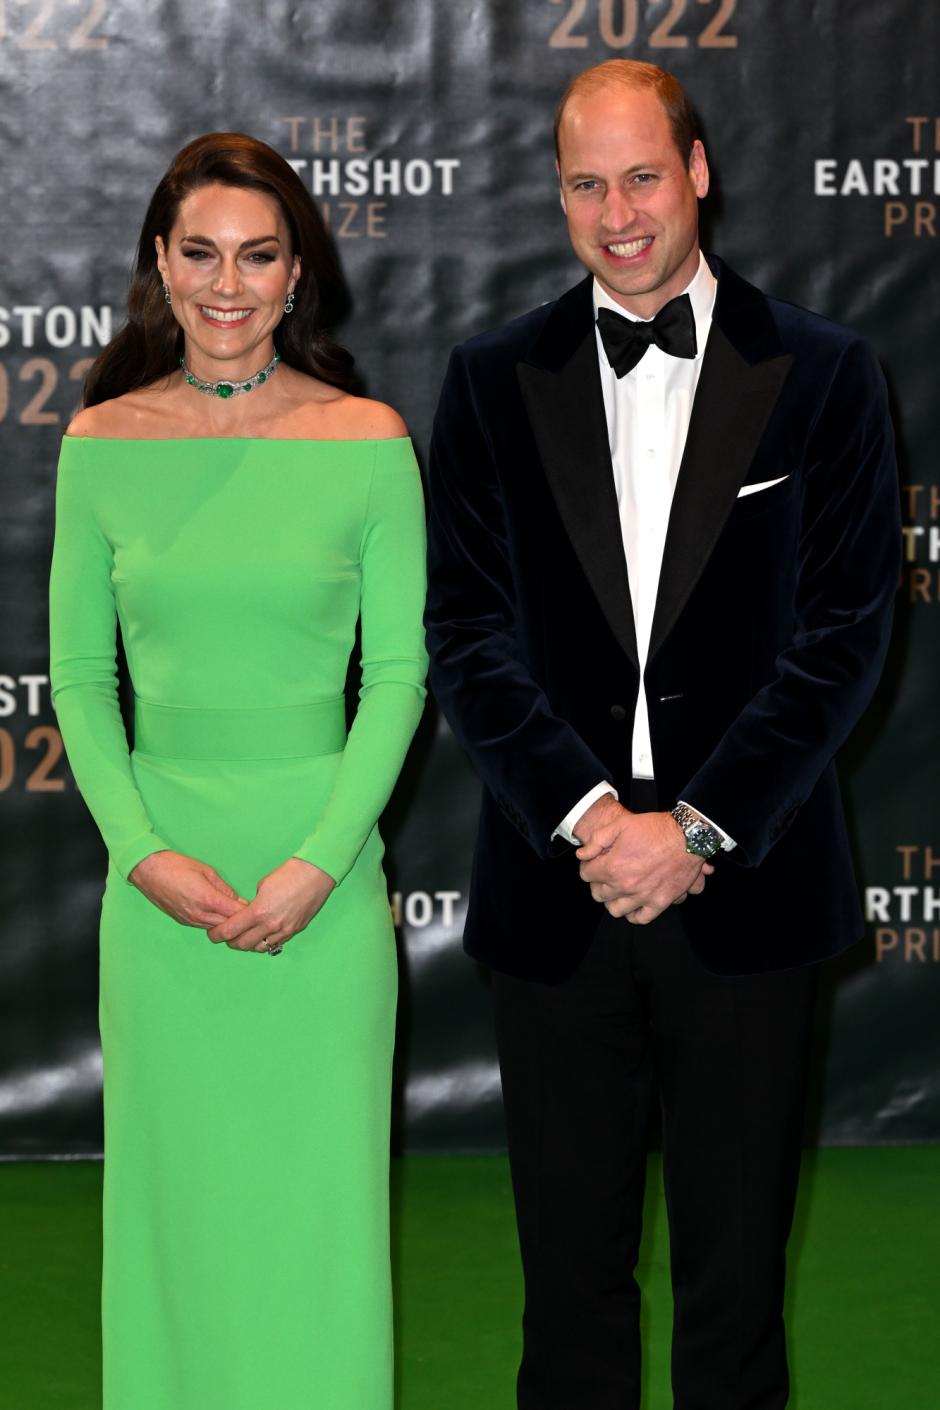 Mandatory Credit: Photo by Tim Rooke/Shutterstock (13646664ap)
Catherine Princess of Wales and Prince William
Prince William and Catherine Princess of Wales visit to The Earthshot Prize Awards, MGM Music Hall at Fenway, Boston, Massachusetts, USA - 02 Dec 2022
The final engagement of The Prince and Princess' trip to Boston will see them attend the second annual Earthshot Prize Awards Ceremony at the MGM Music Hall at Fenway, during which the 2022 Winners will be unveiled.